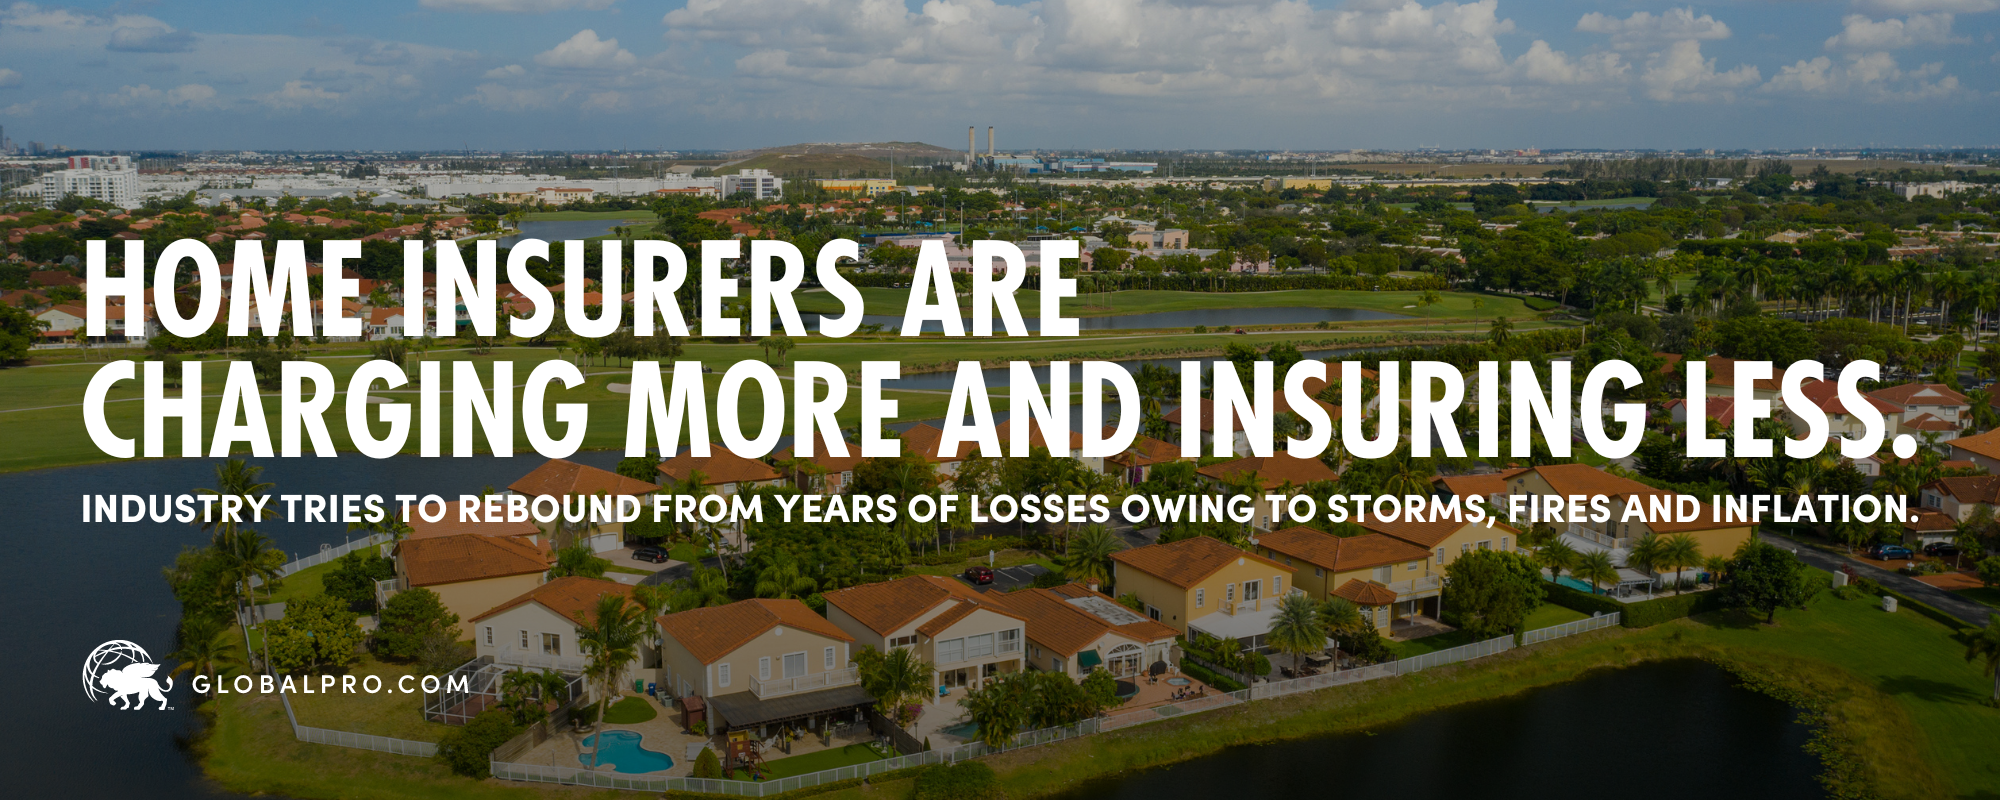 Home Insurers Are Charging More and Insuring Less